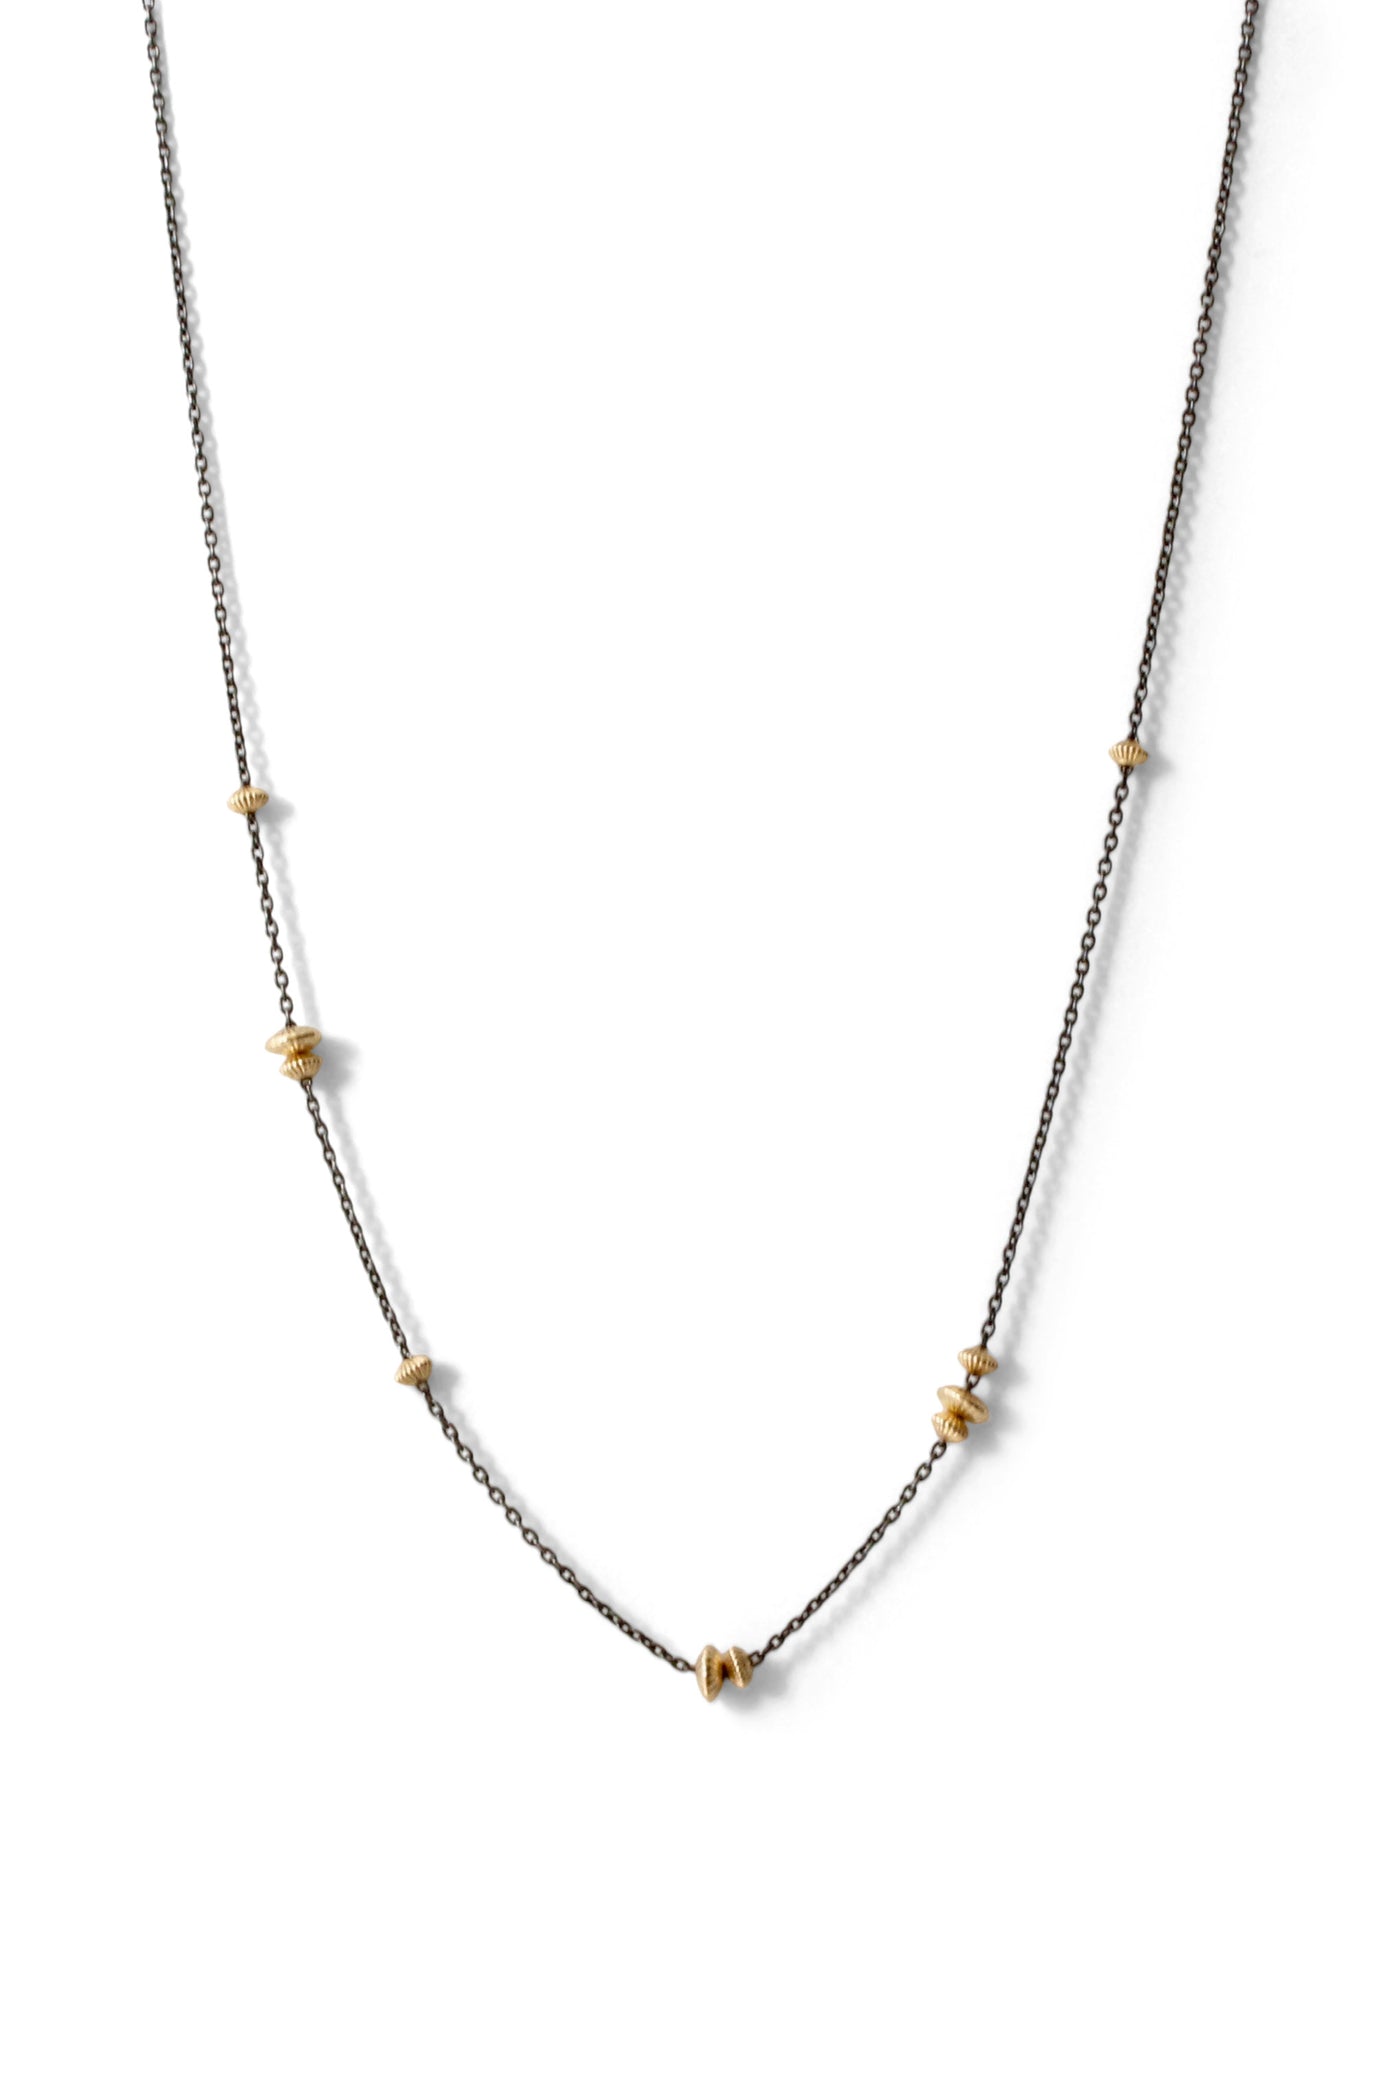 Delicate Beaded Necklace with Gold Satellite Beads